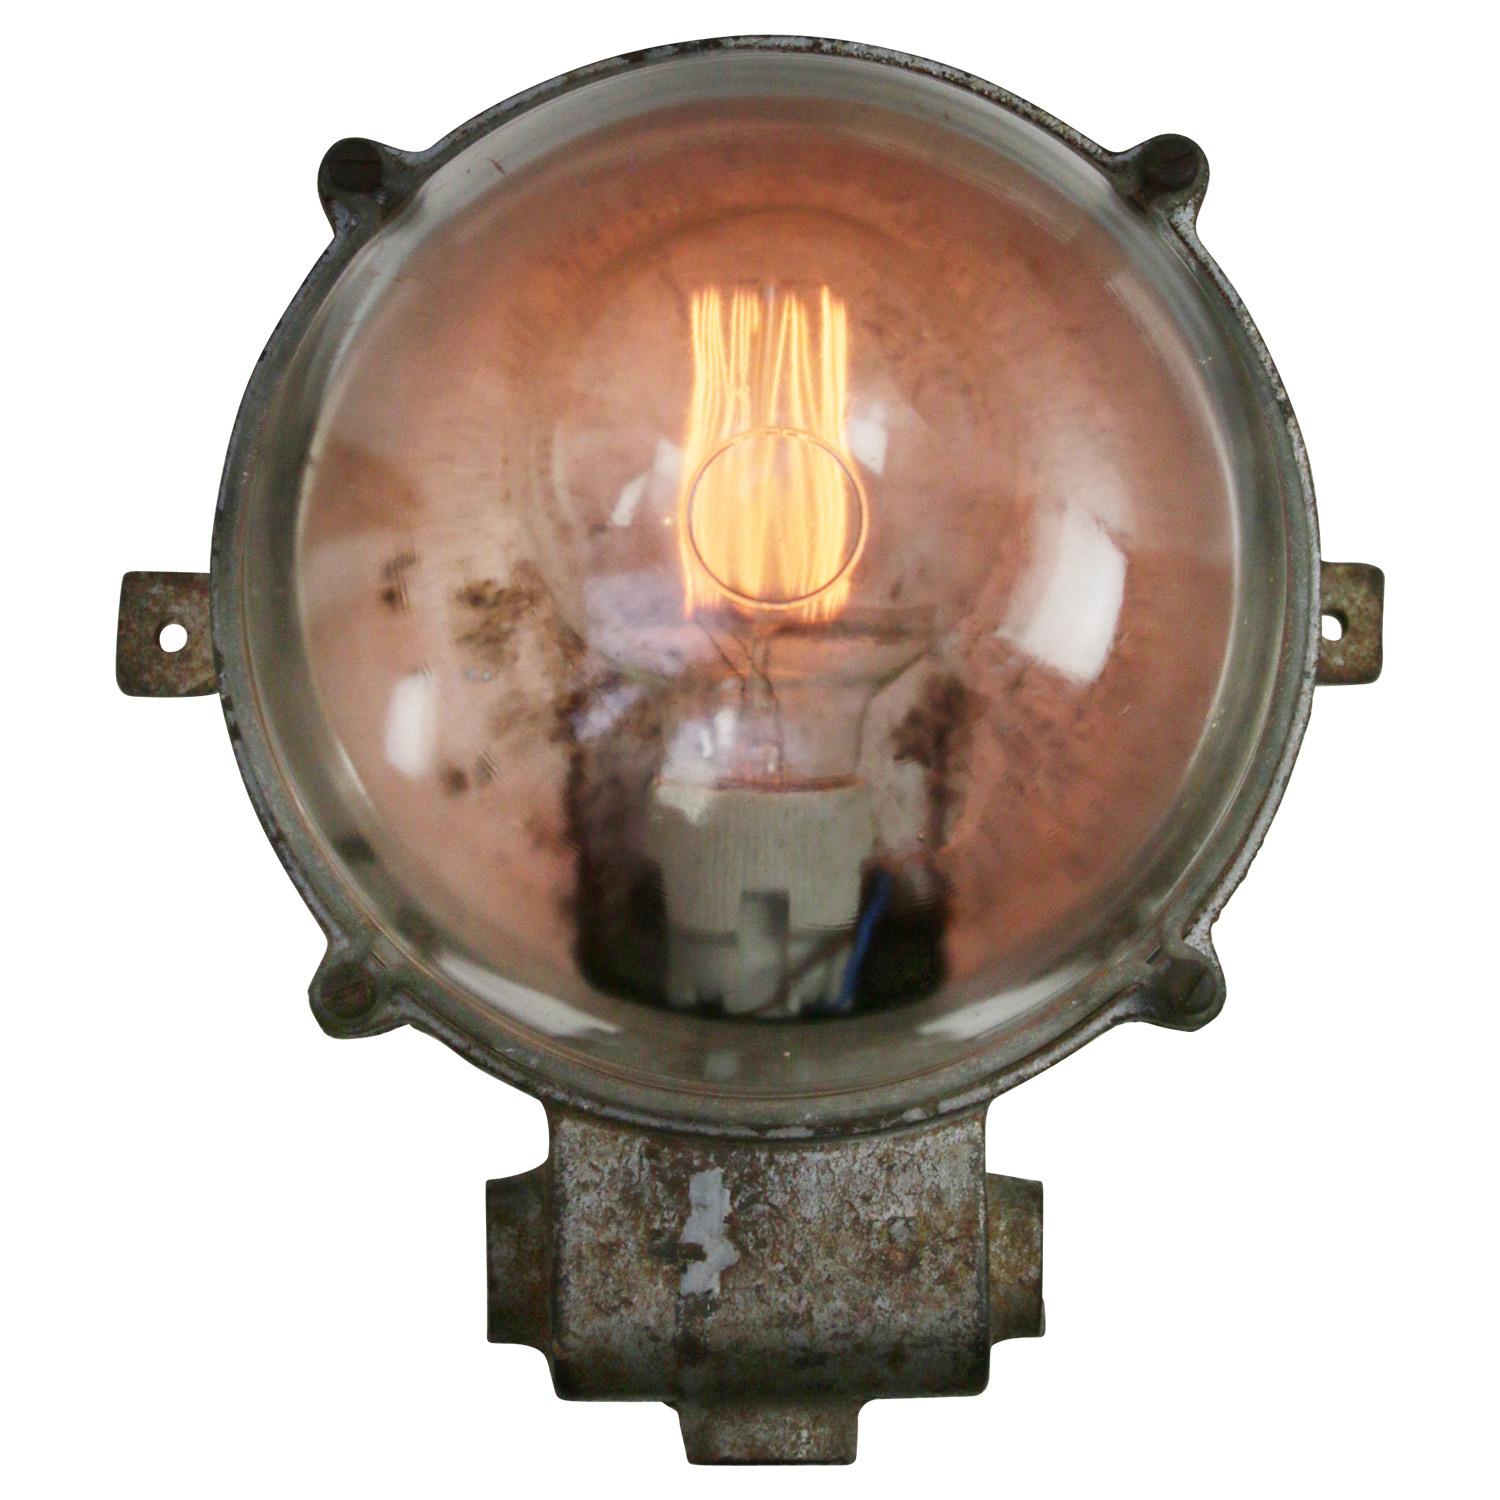 French Industrial wall / ceiling lamp by Mapelec, Amiens, France
Cast Iron back with clear glass.

Weight: 3.40 kg / 7.5 lb

Priced per individual item. All lamps have been made suitable by international standards for incandescent light bulbs,